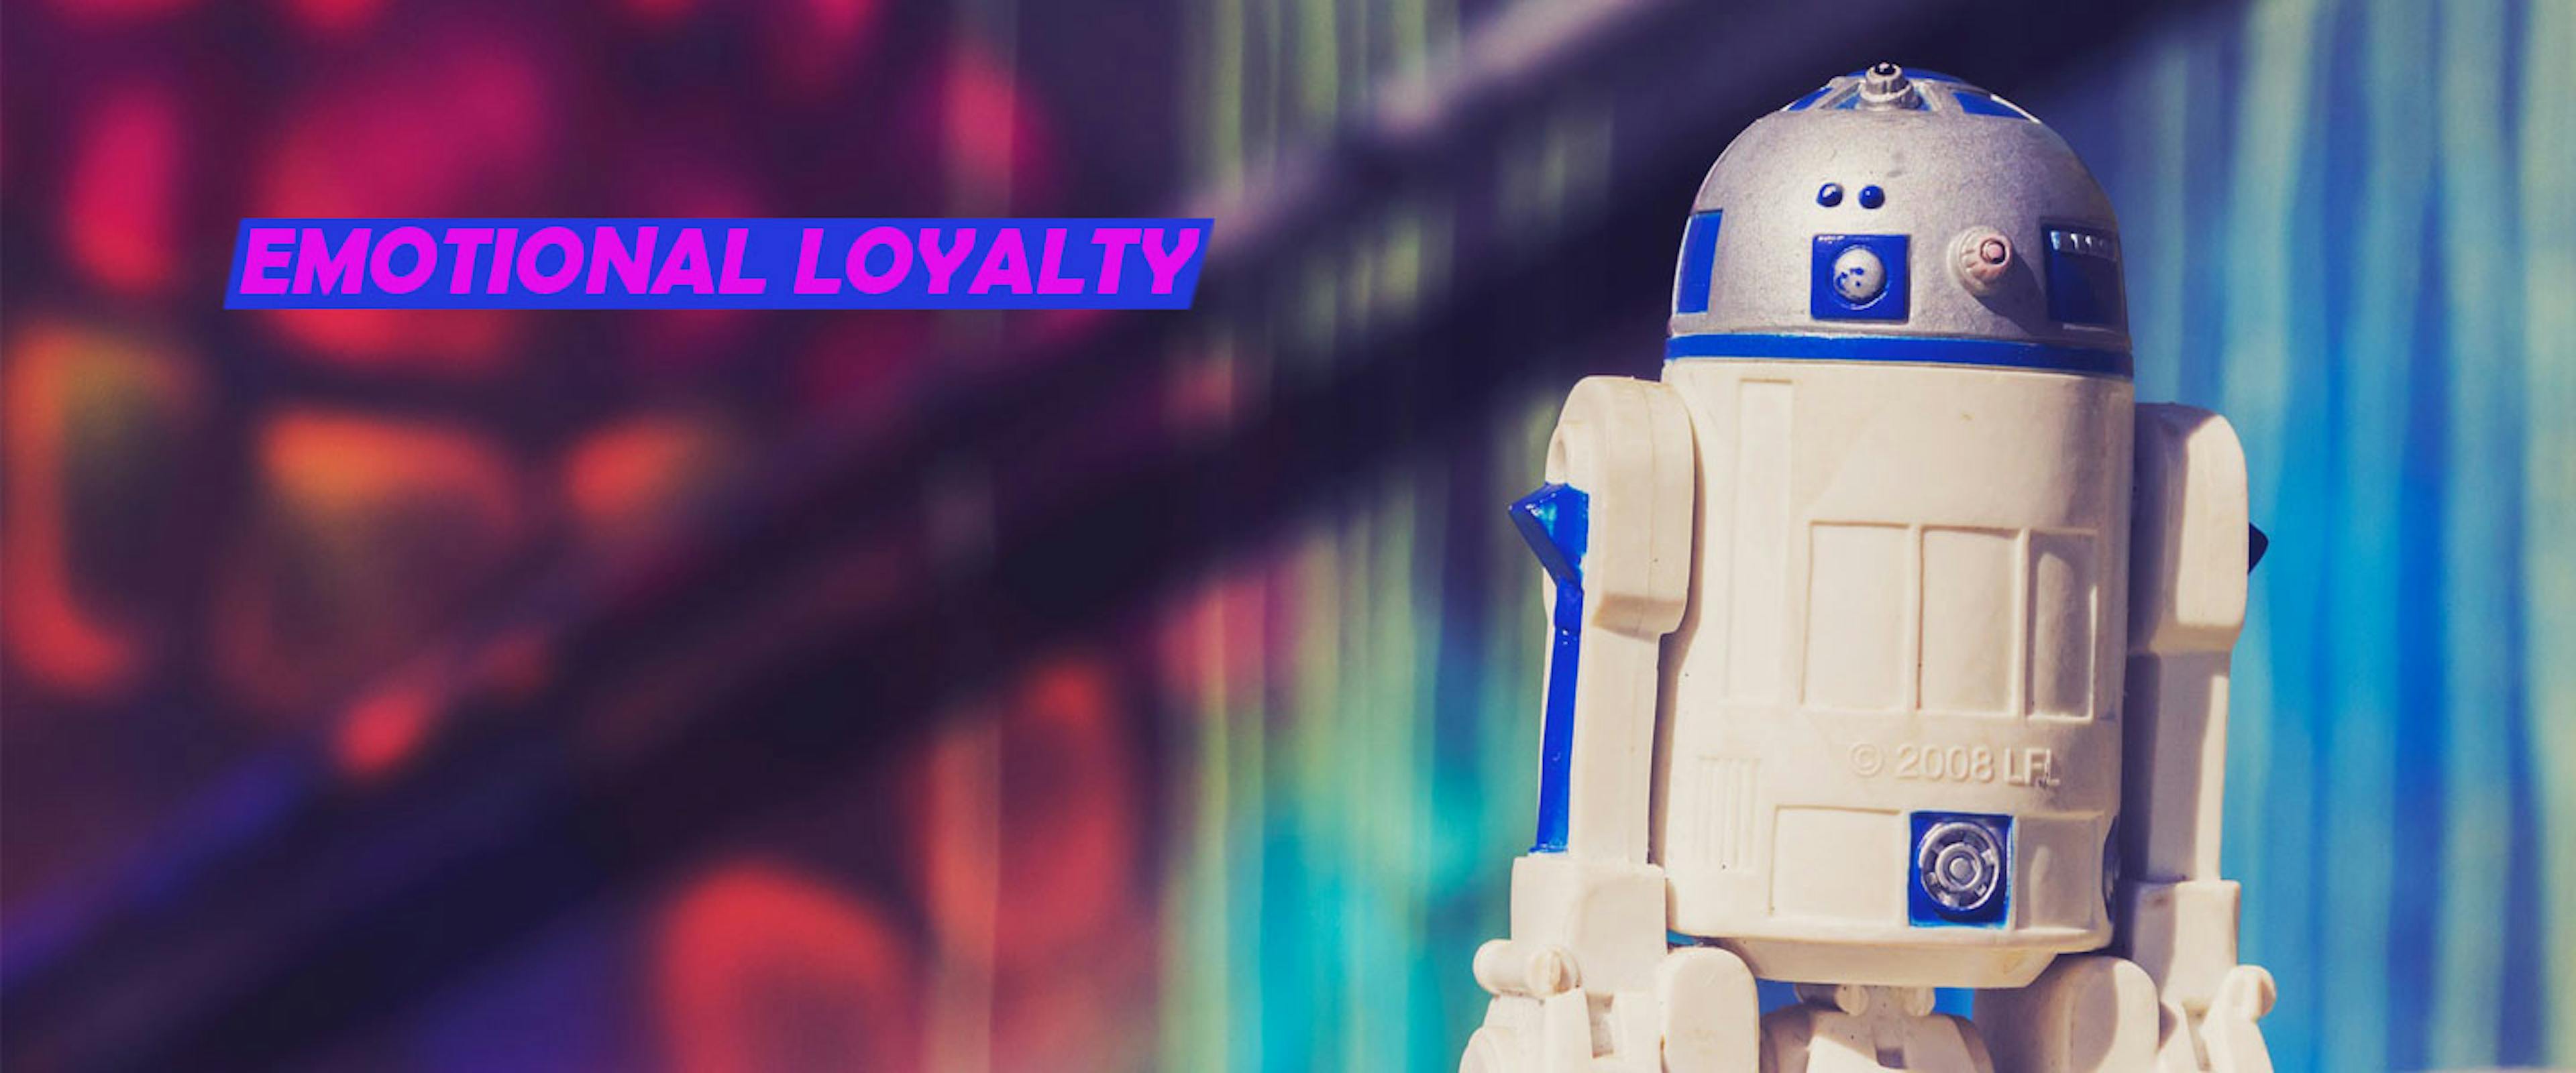 /how-emotional-loyalty-is-key-for-digital-tech-companies-success feature image